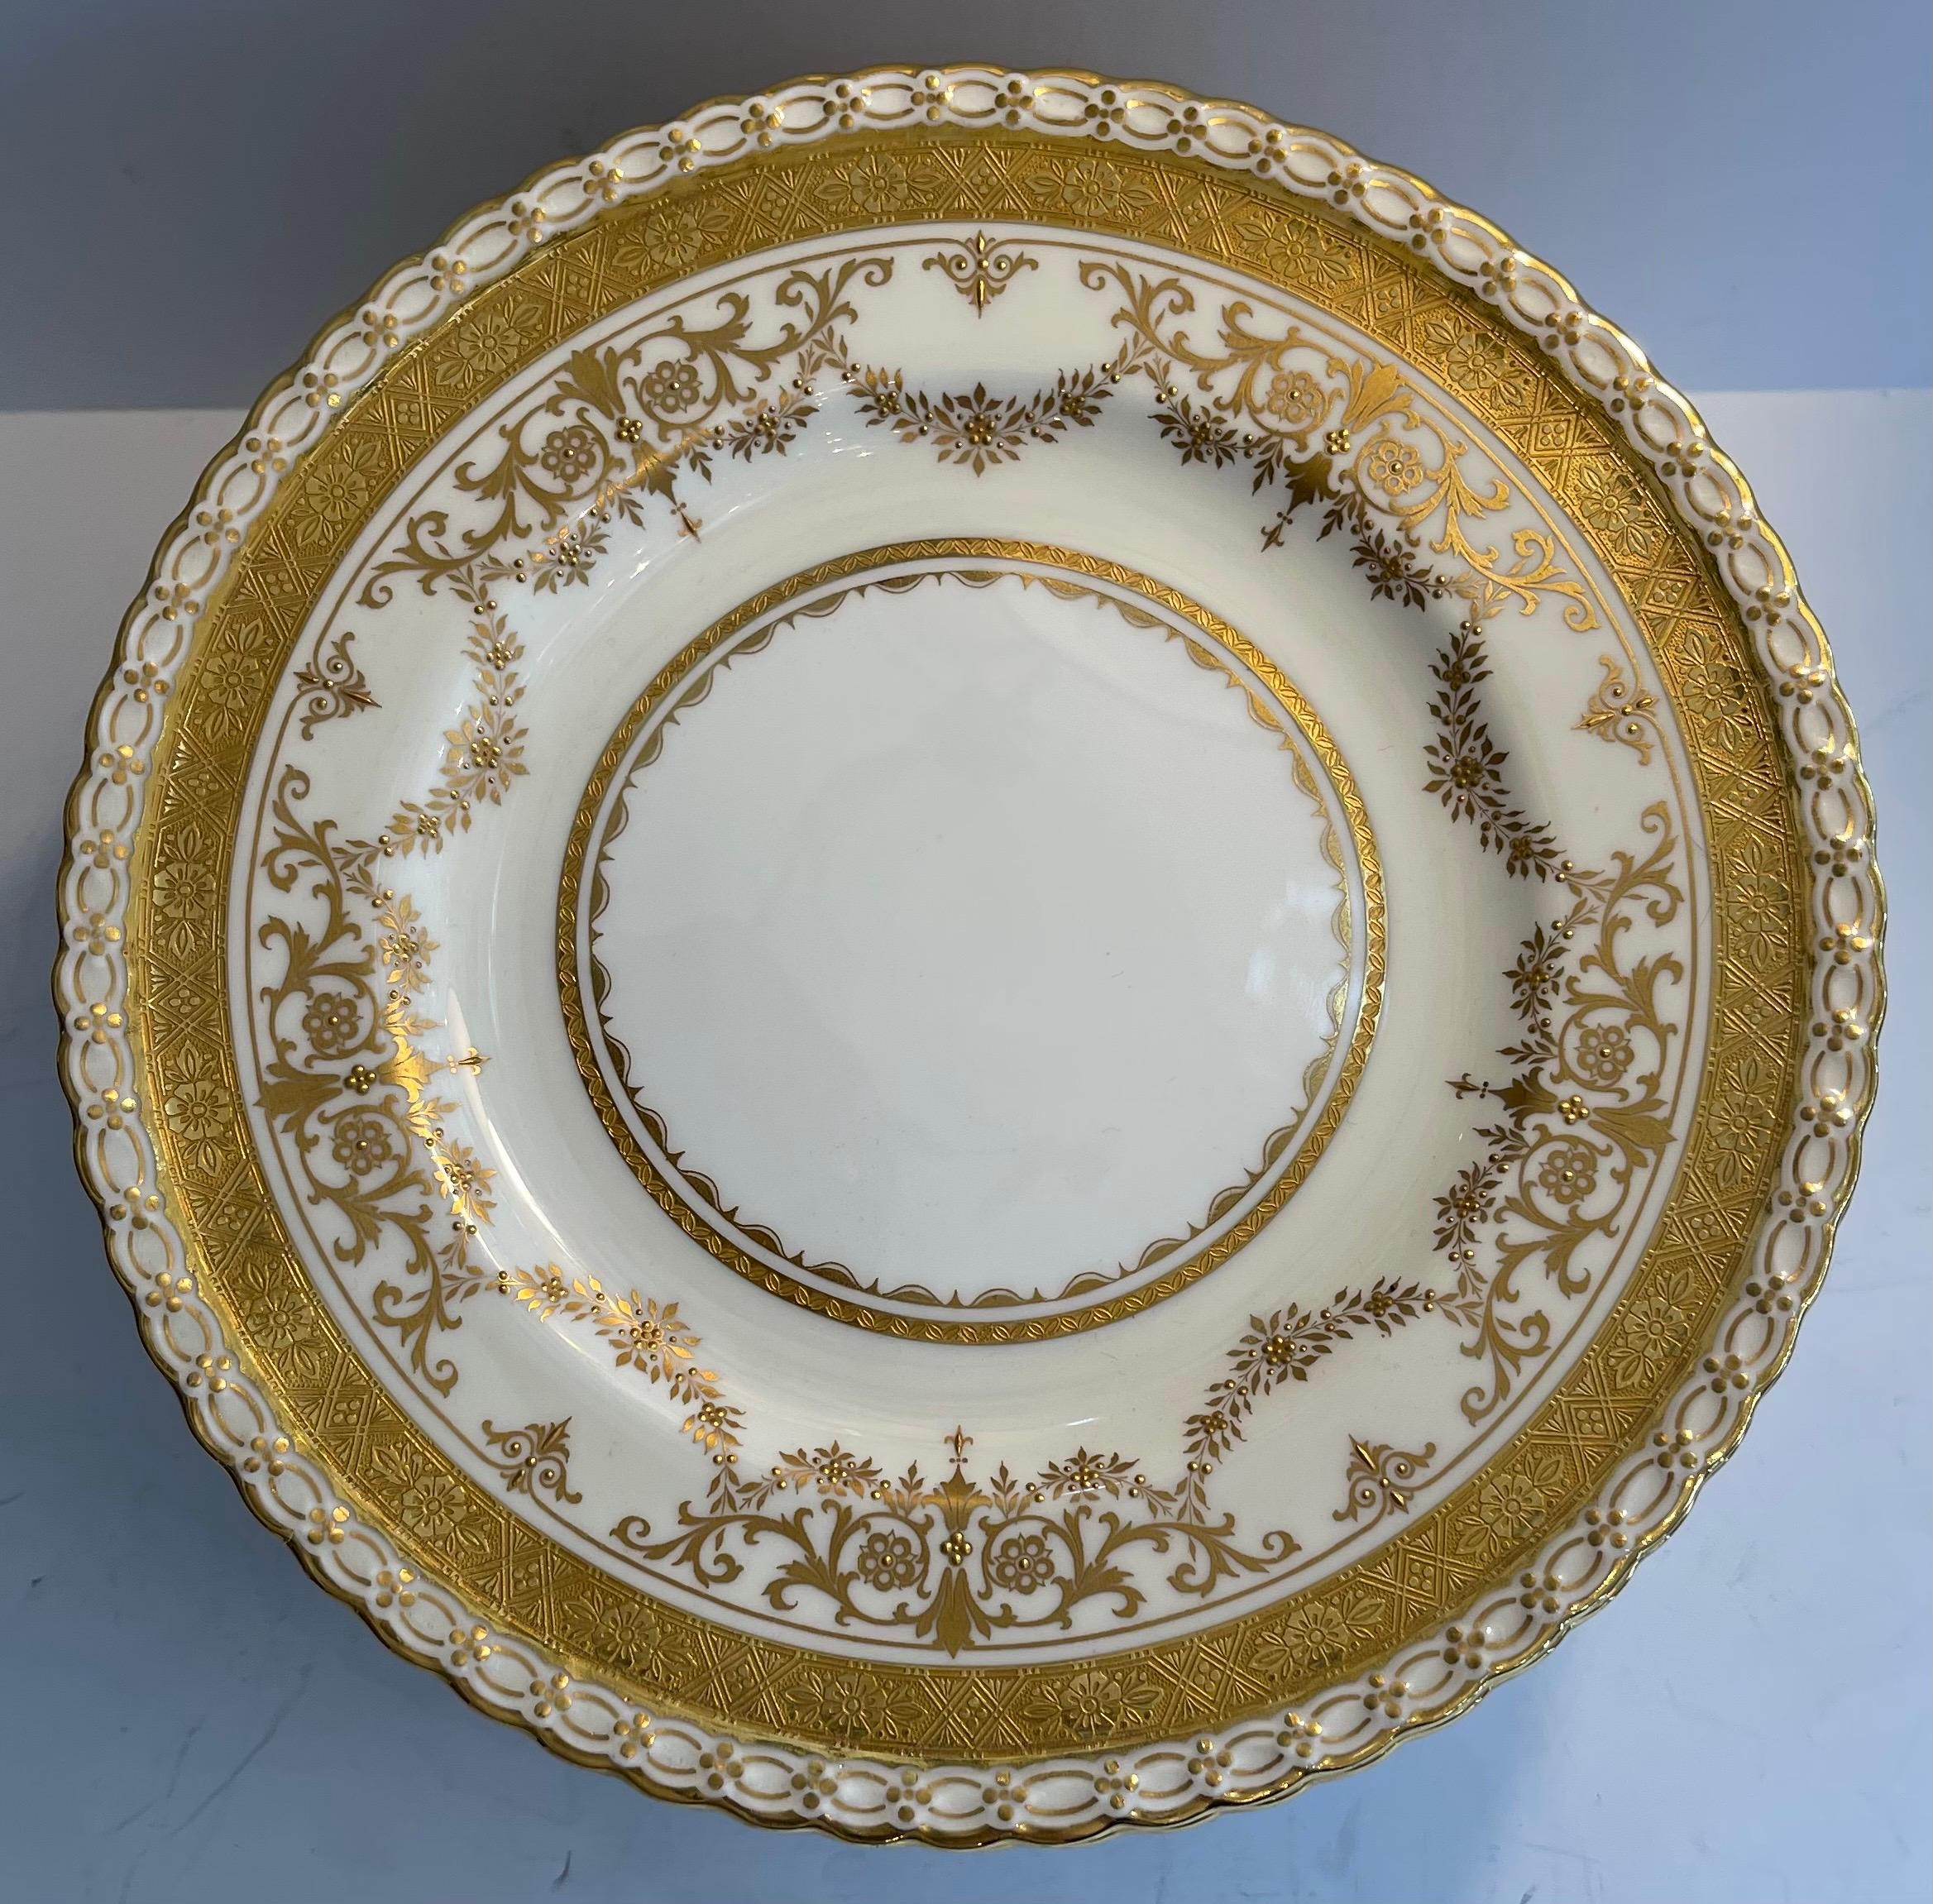 A Wonderful Service Of 12 Minton Raised Gold Hand Painted Dinner Plates Retailed By Ovington's New York, Seem To Have Never Been Used Some Retaining Original Sticker. 